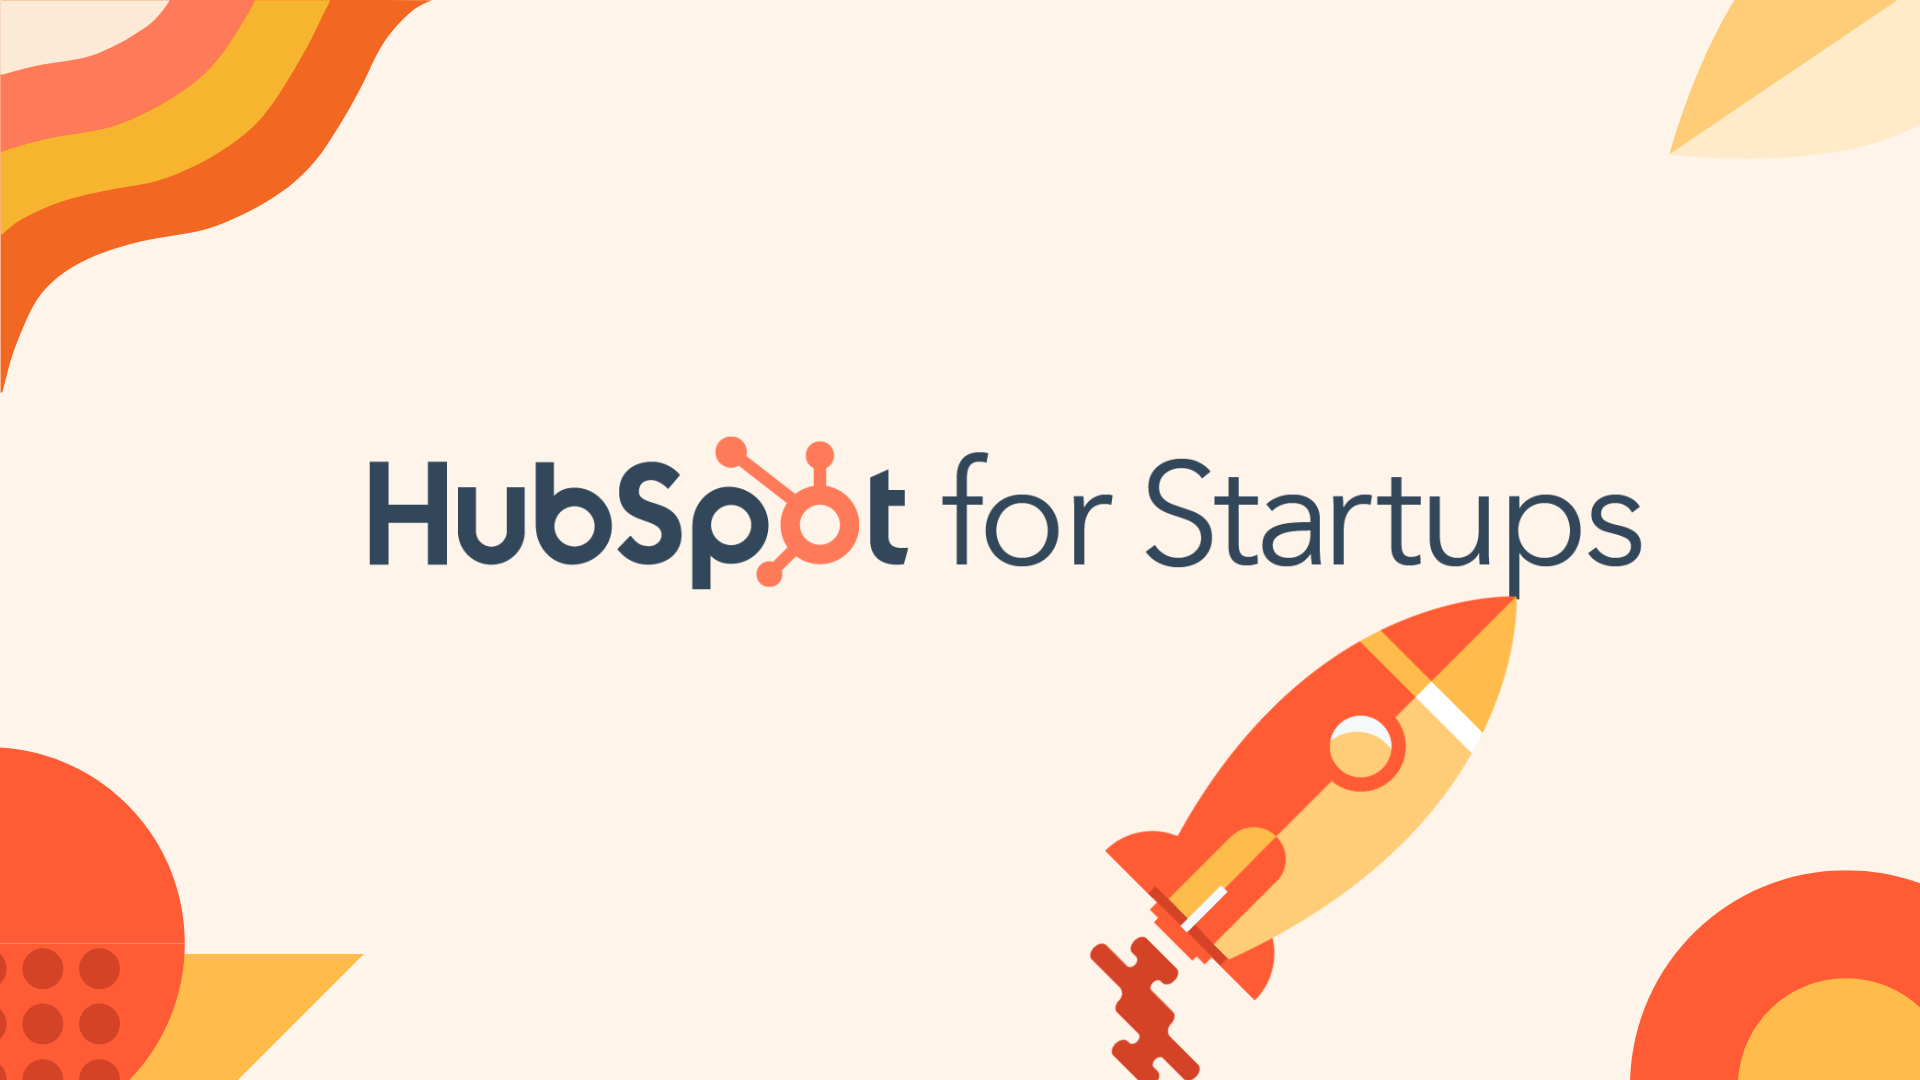 HubSpot Announces Strategic Collaboration Agreement with AWS to Help Global Startups Grow Better